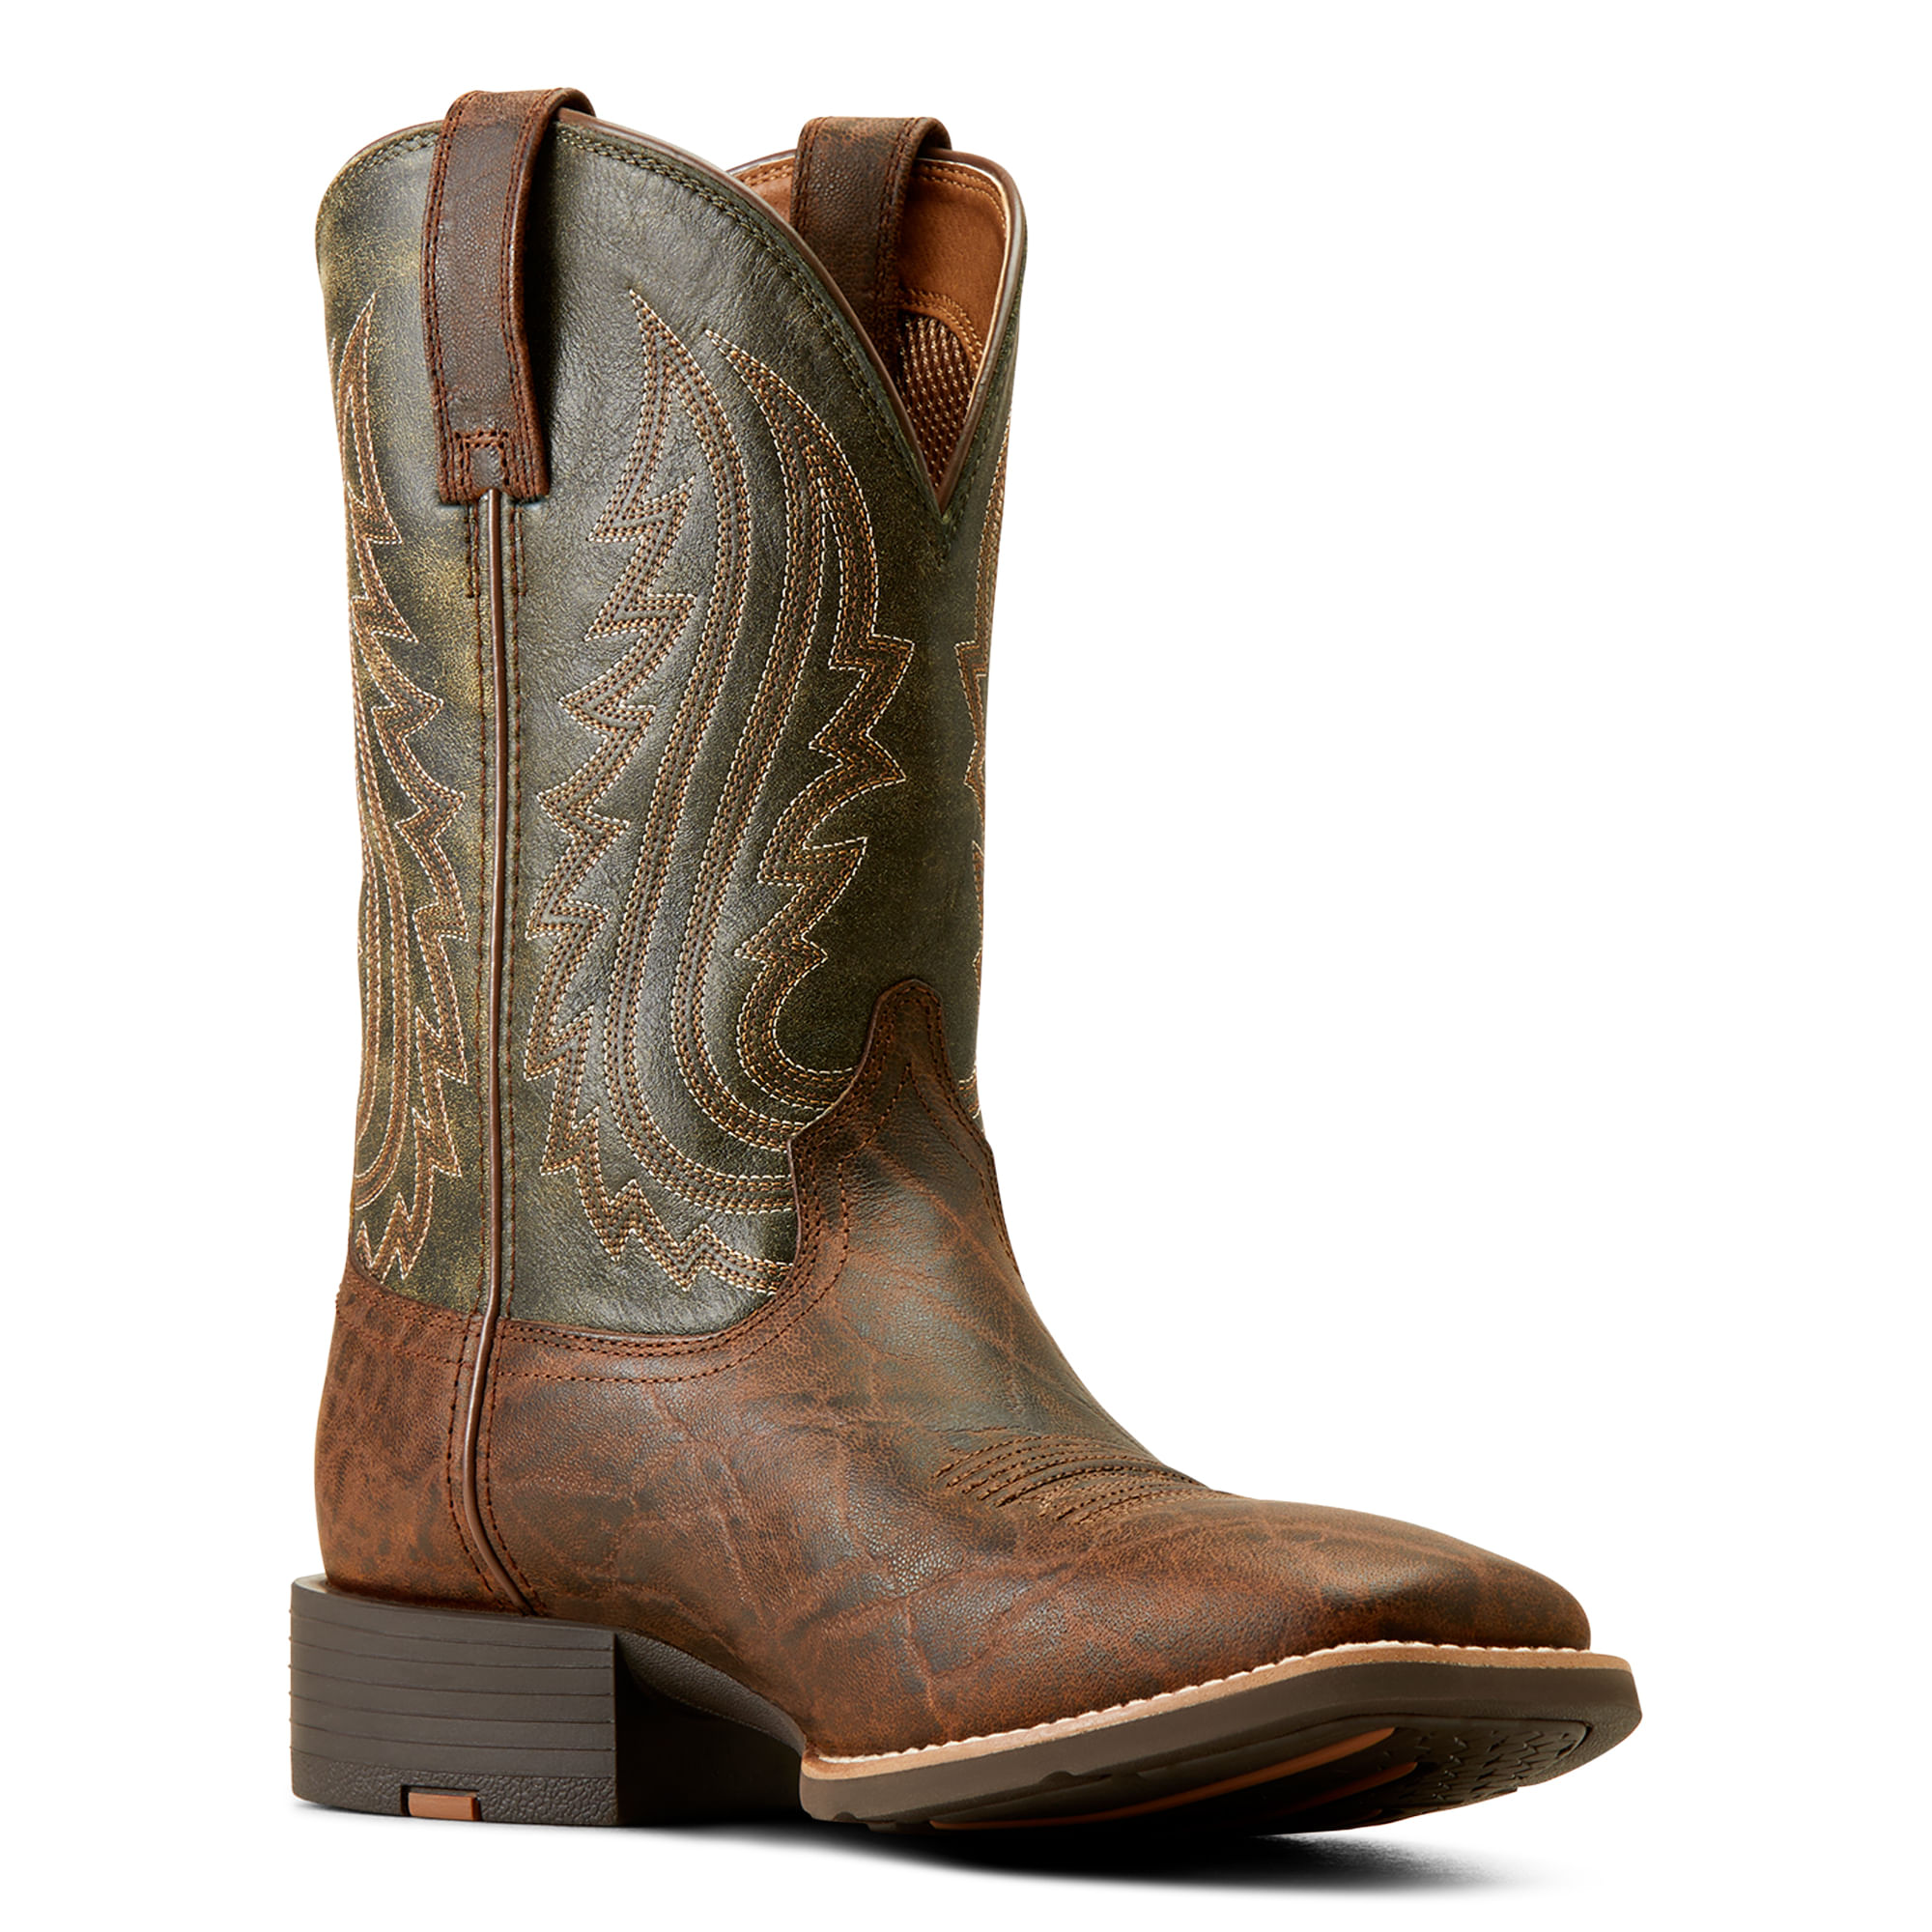 Ariat - Boots - Texas Boot Company